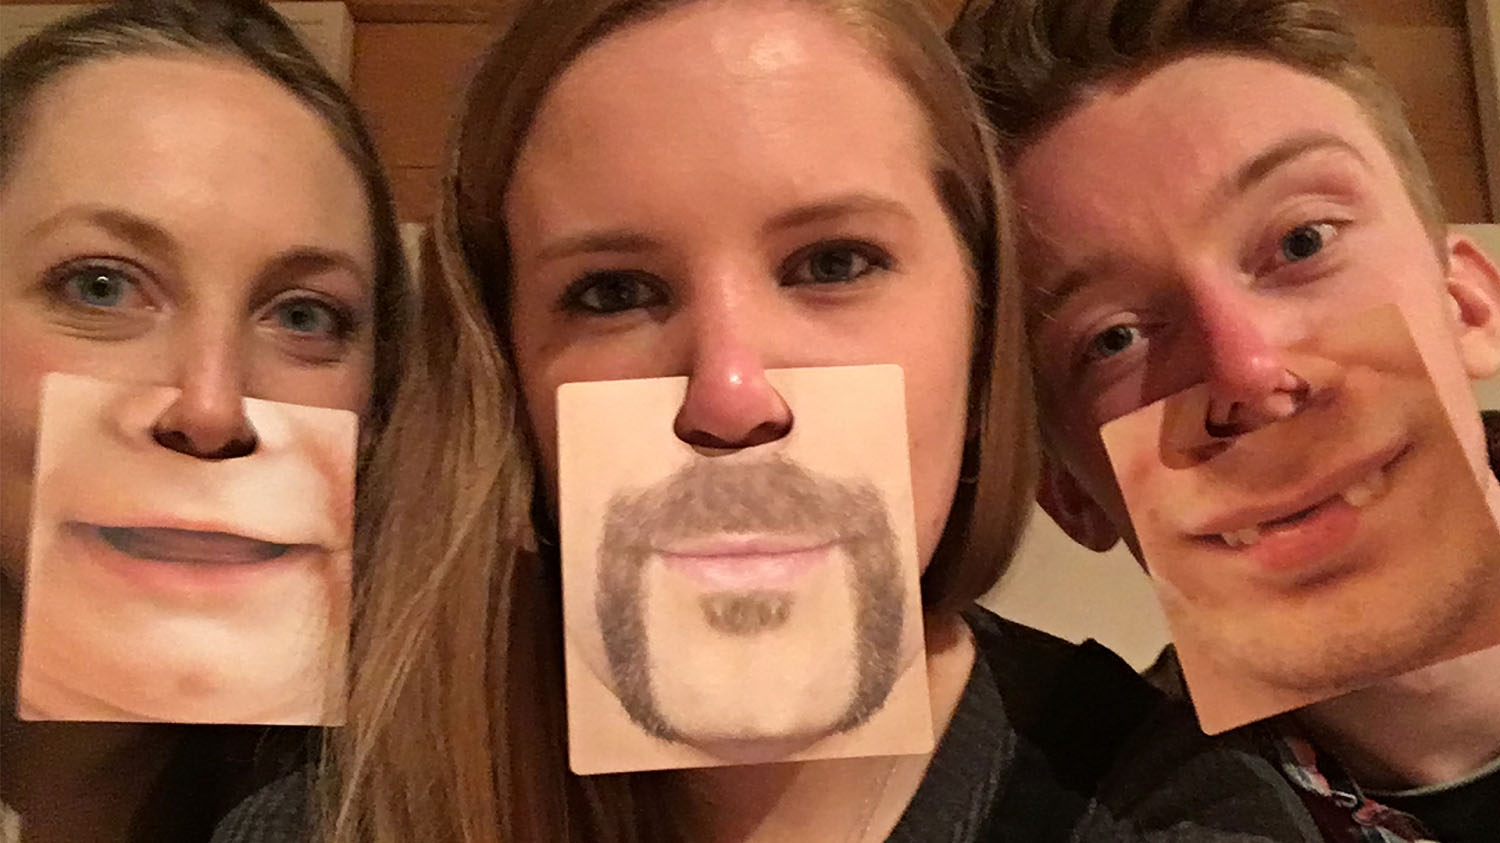 A selfie of Imogen and two friends with cards attached to their nose with other peoples chins on it, to make it look like they have a different chin. 